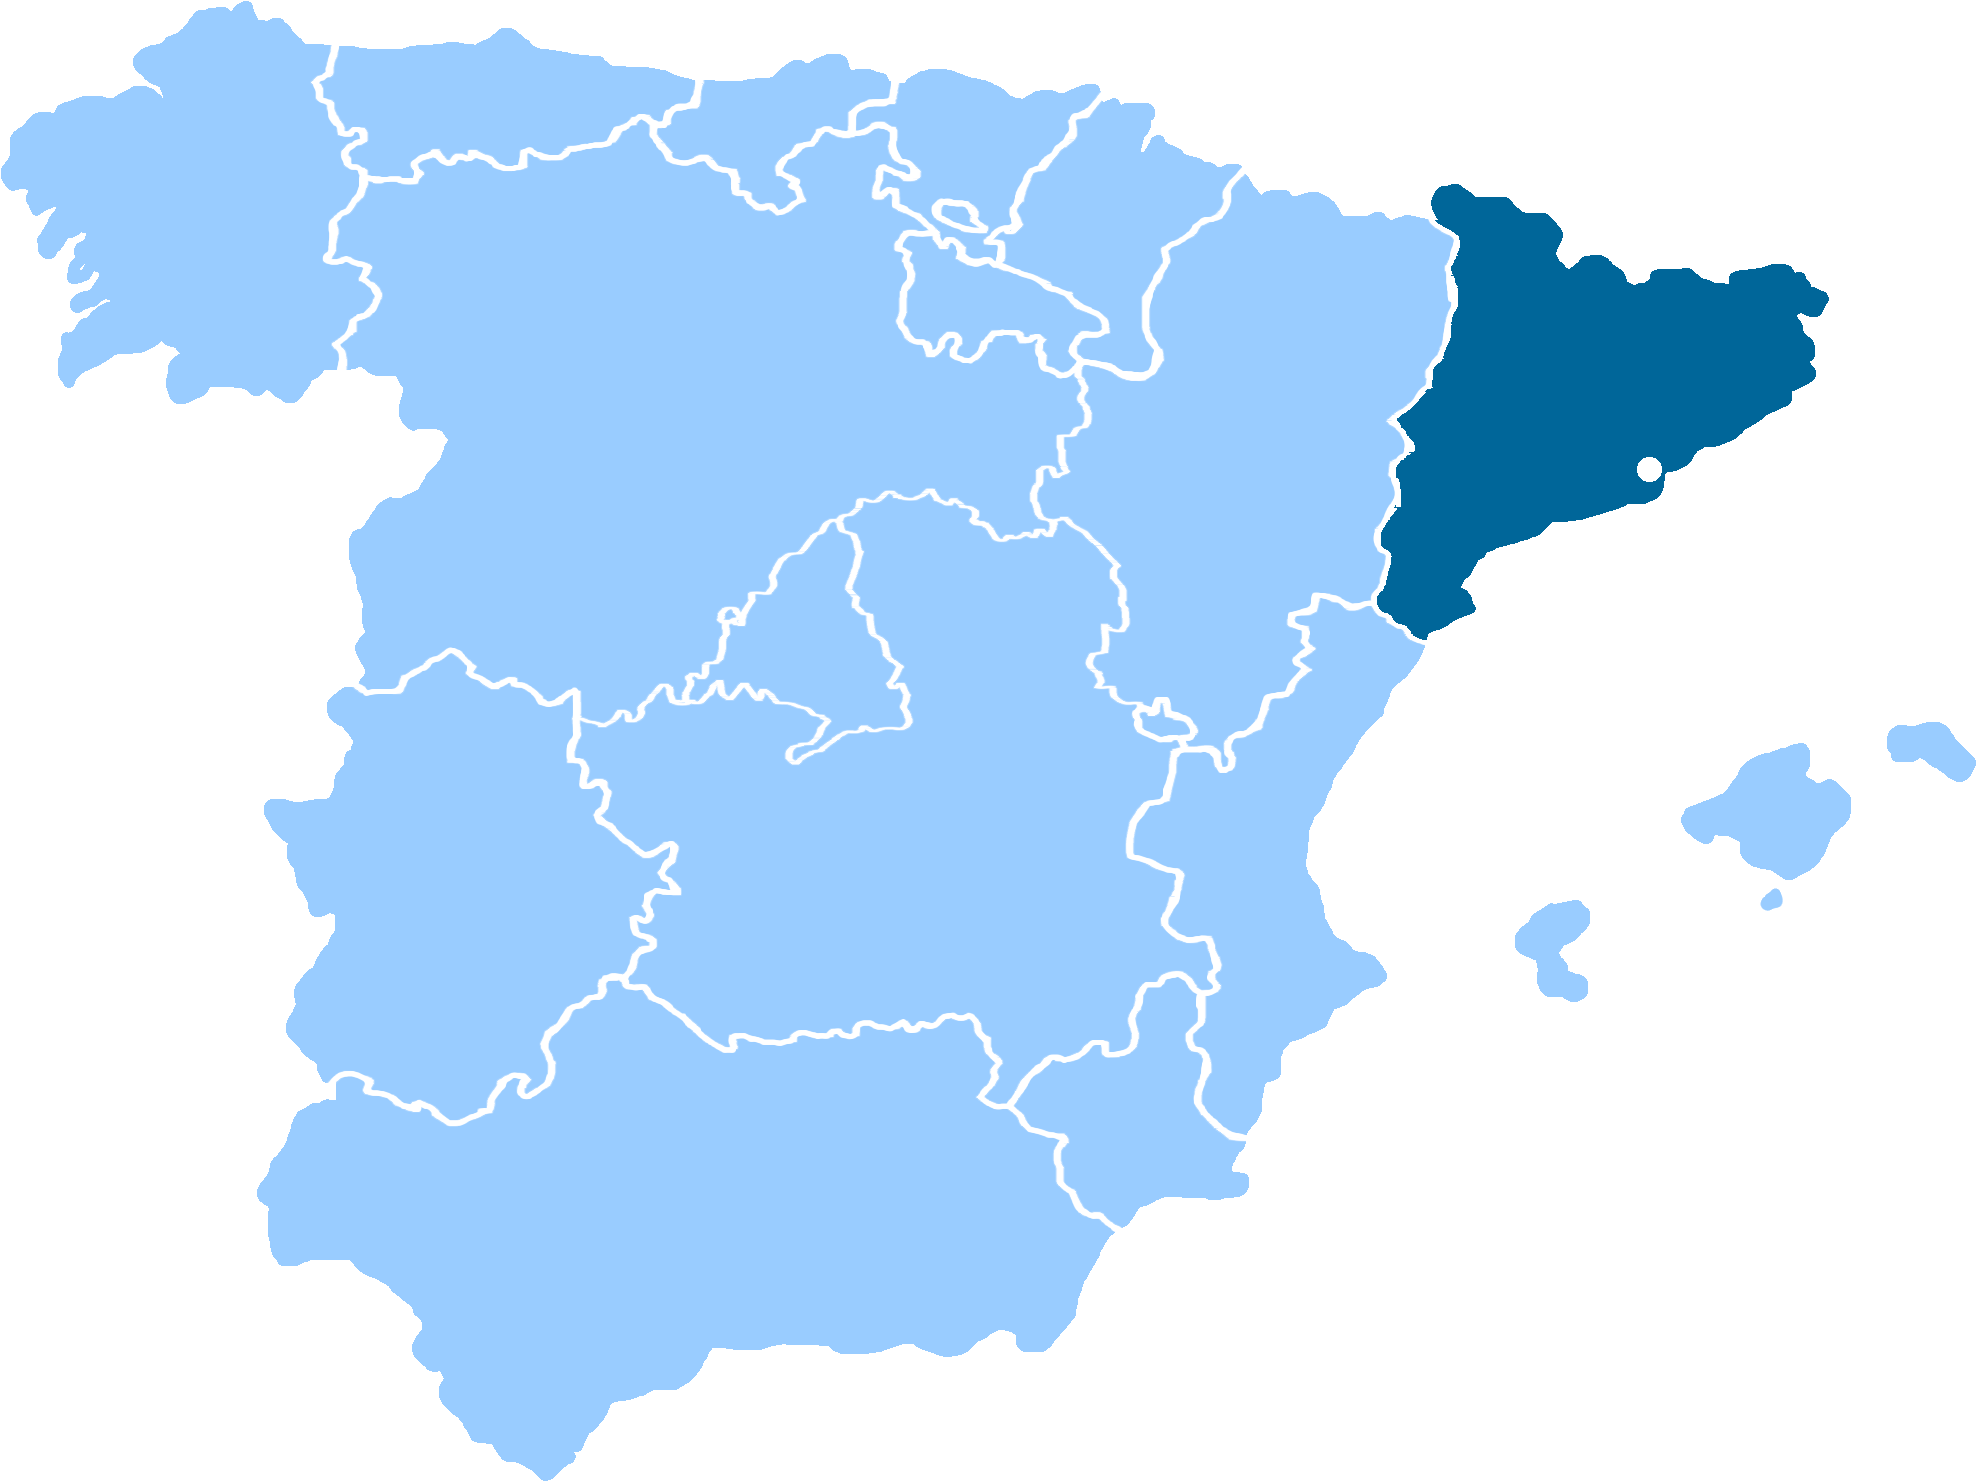 Spain Catalonia Map Highlighted